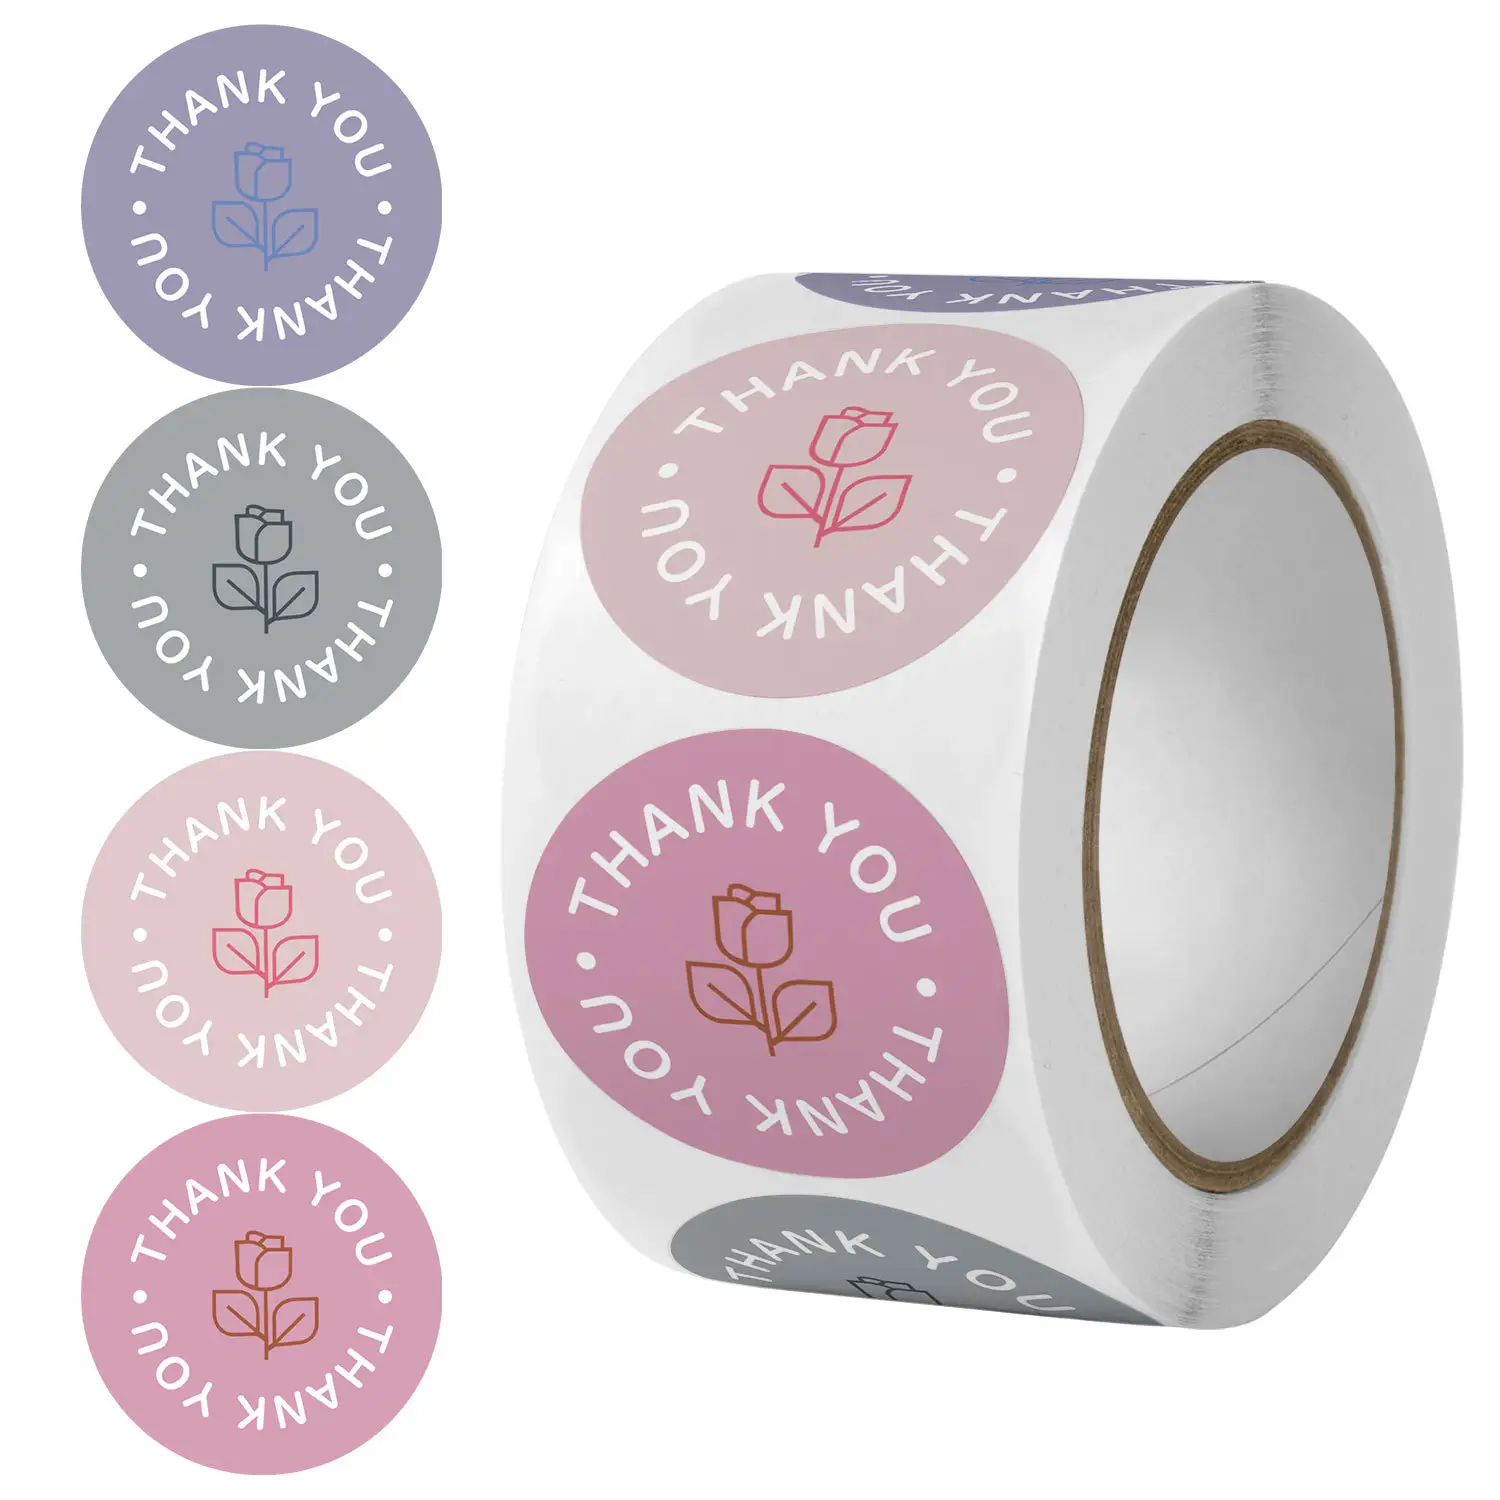 500 Sticker Per Roll "Thank you" Self Adhesive Sticker Labels For Gift/Envelope/Paper Bag Packaging